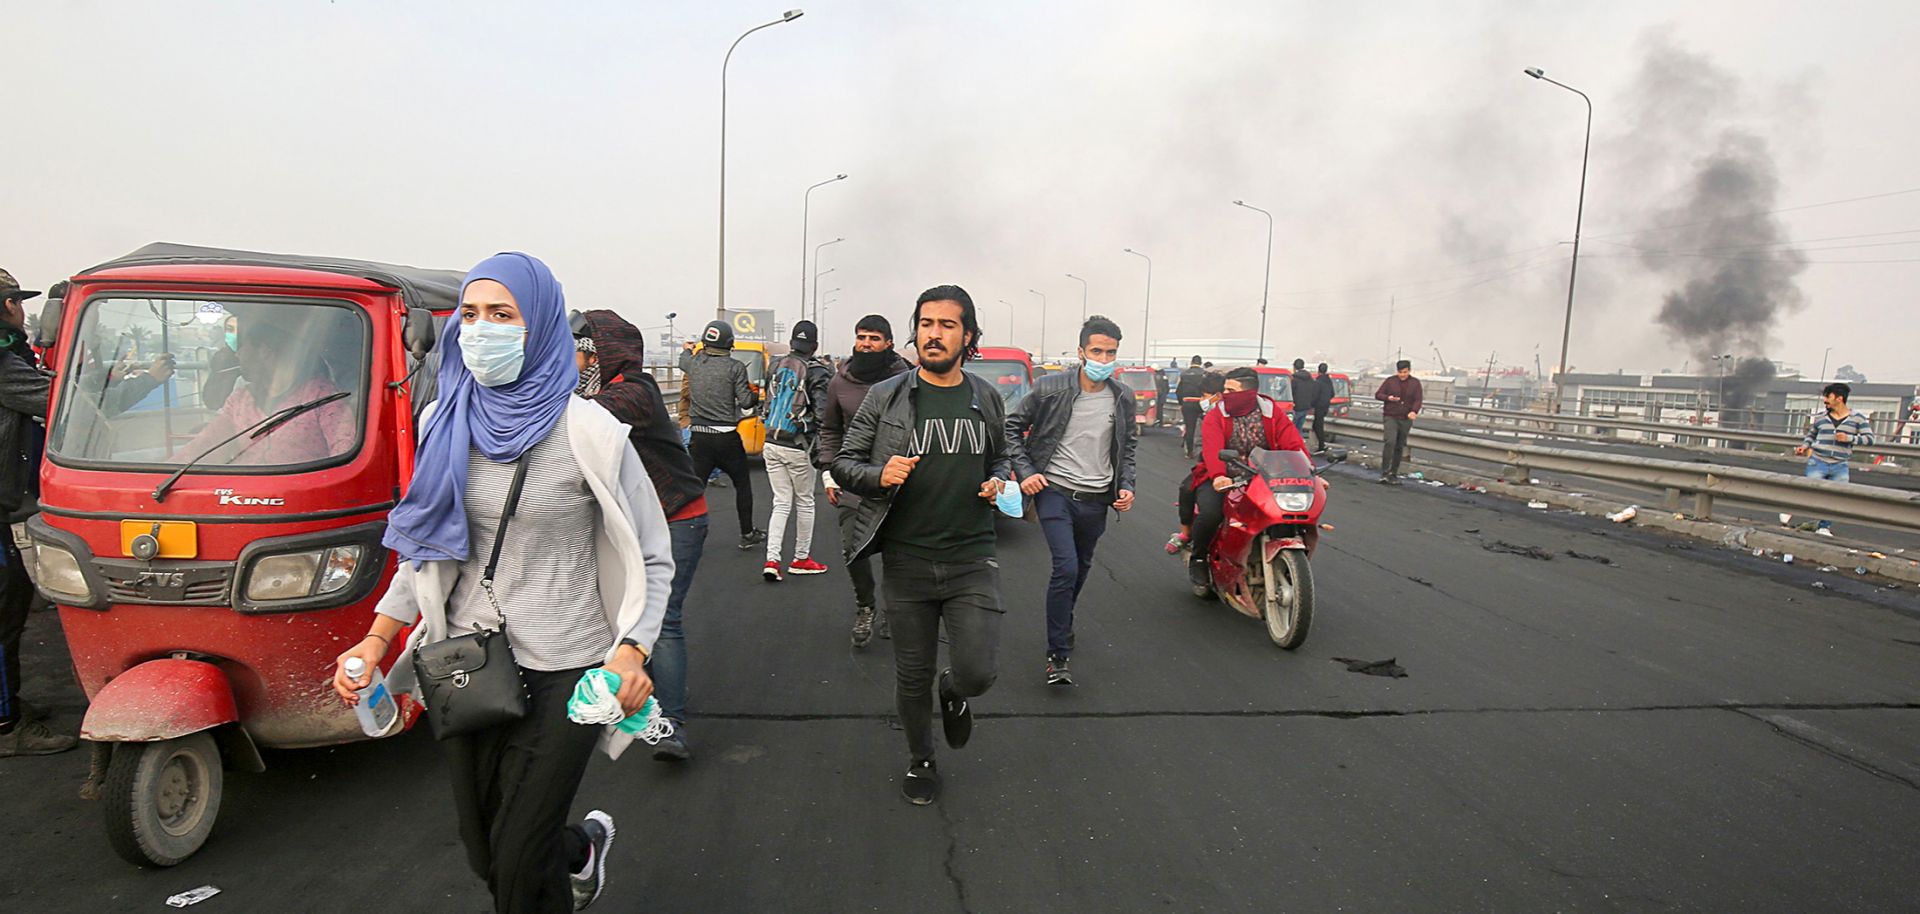 Iraqis run for cover during an anti-government demonstration in Baghdad on Jan. 23, 2020. Protests have rocked Iraq since October but recently had abated amid spiraling tensions between the country's key allies, the United States and Iran.